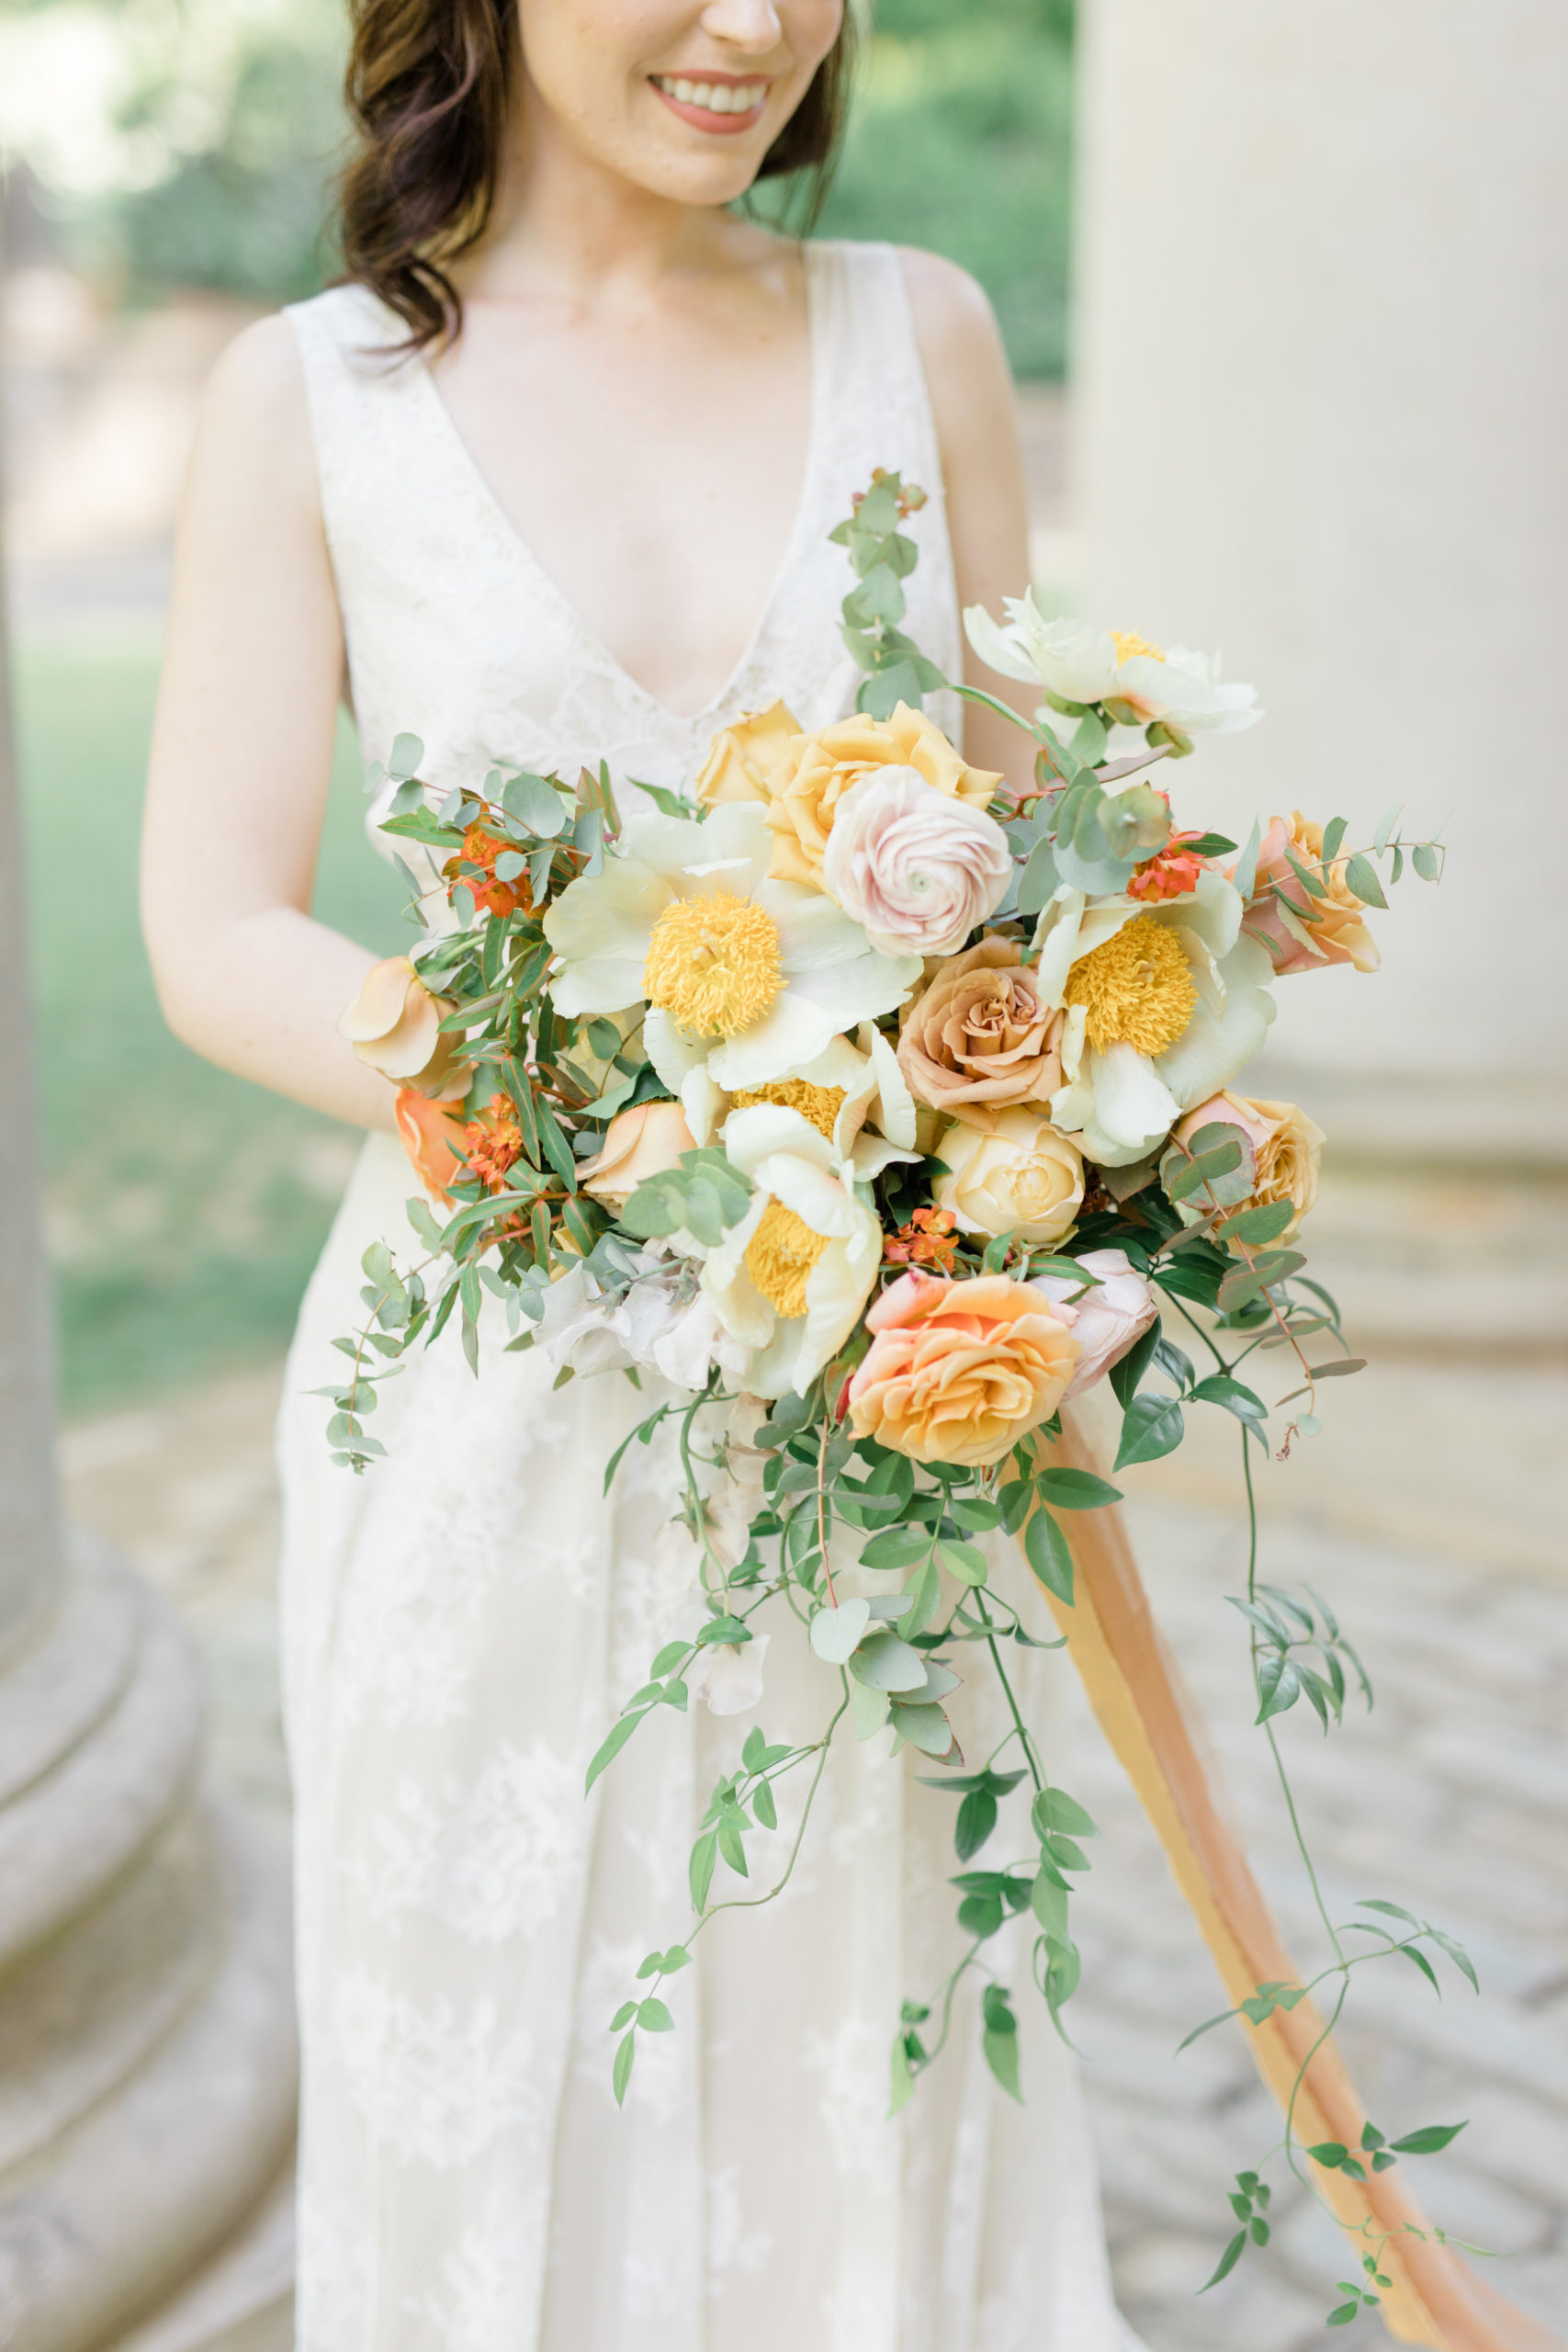 Yellow and orange wedding bouquet with peonies, poppies and garden roses.